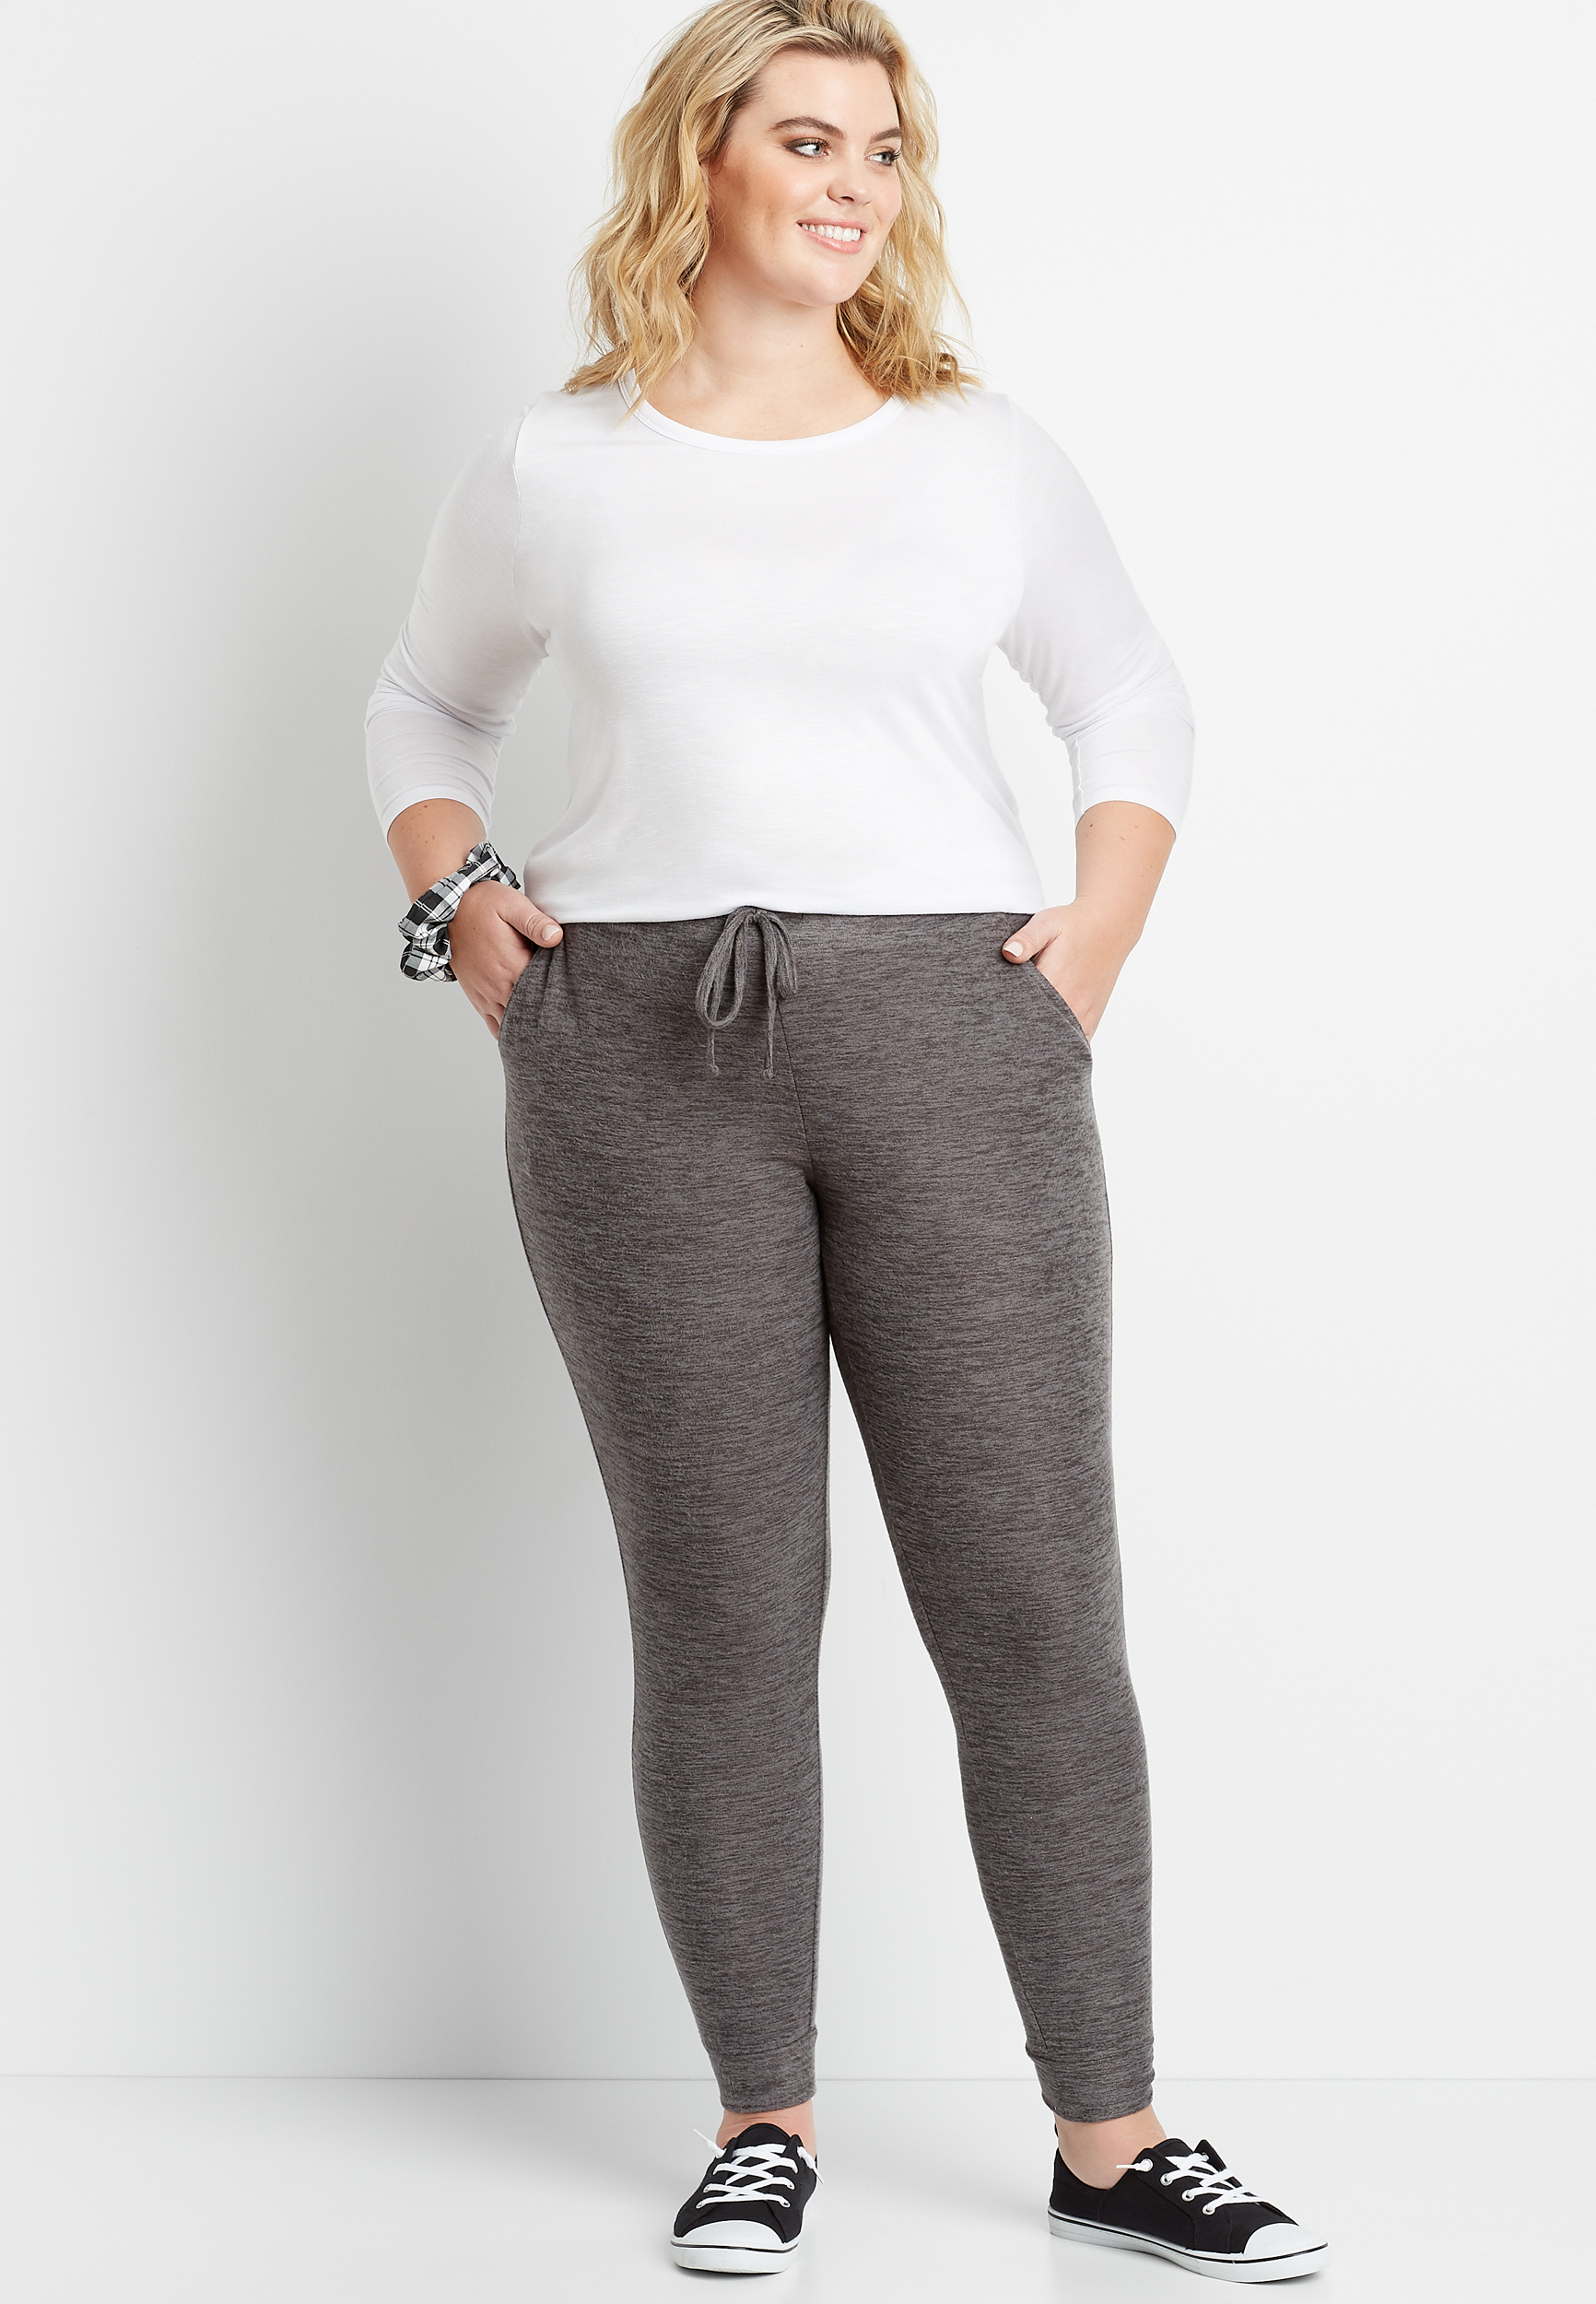 Women's Plus Size Joggers & Sweatpants | Maurices | maurices